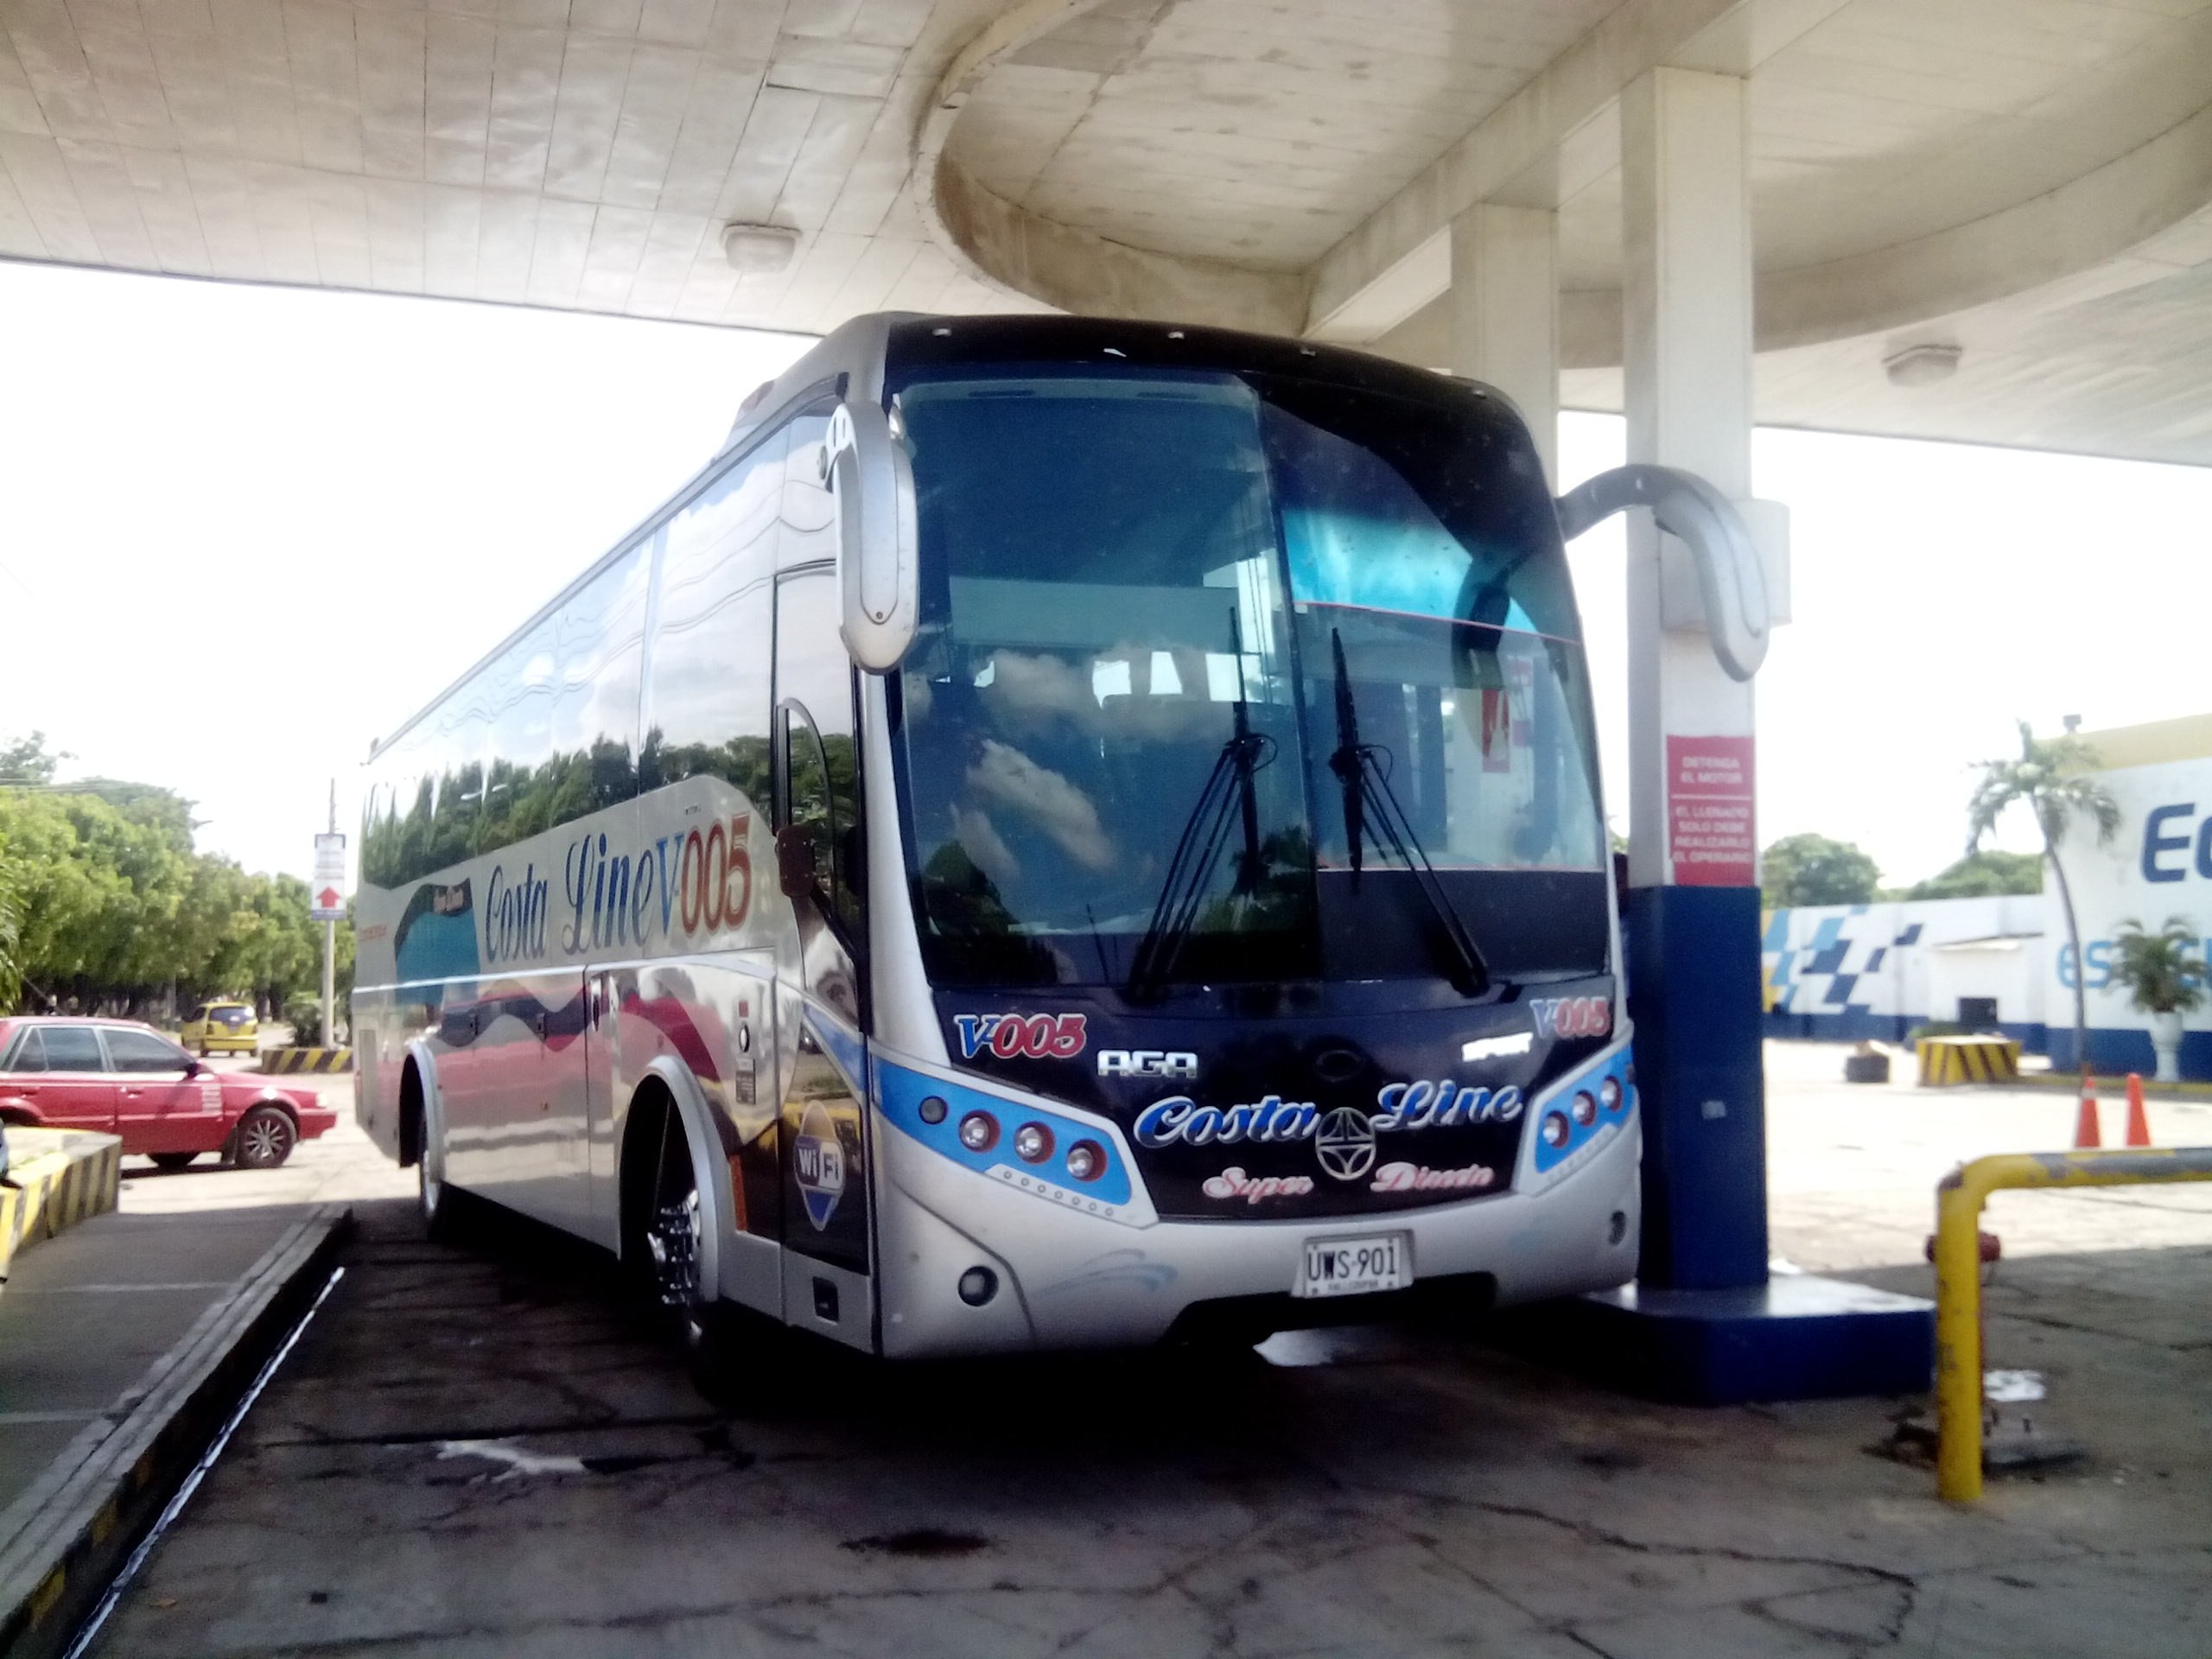 cootracegua, Costa, Line, V 005, Aga, Spirit, Volvo, B9r, Buses, Colombianos, Colombian, Coach Wallpaper